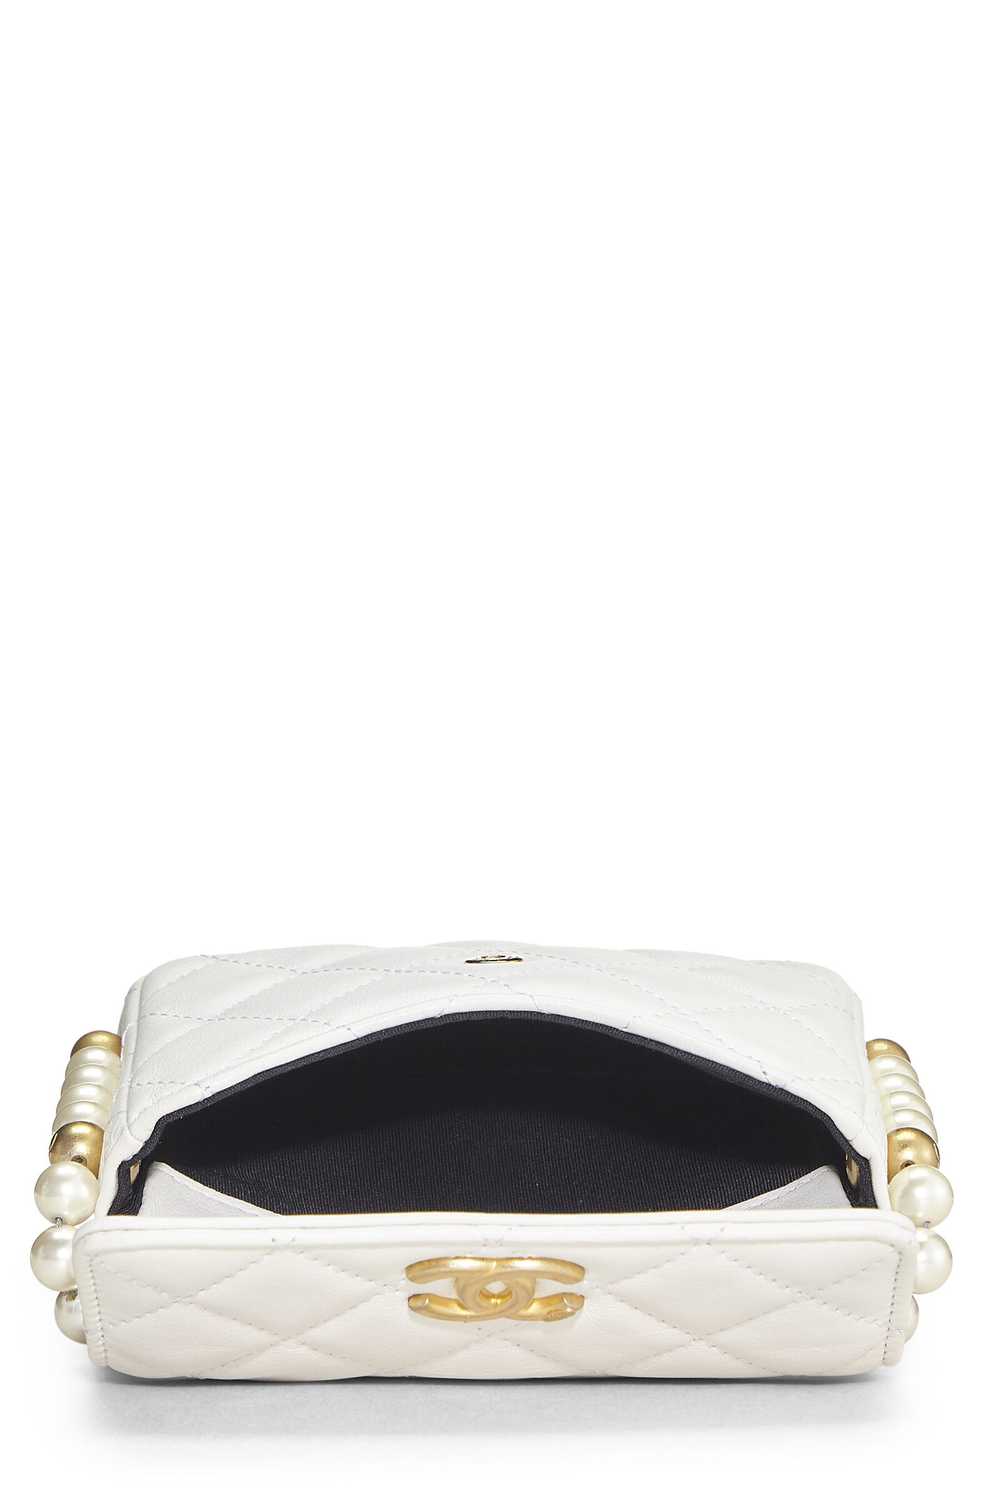 White Calfskin About Pearls Card Holder With Chain - image 6